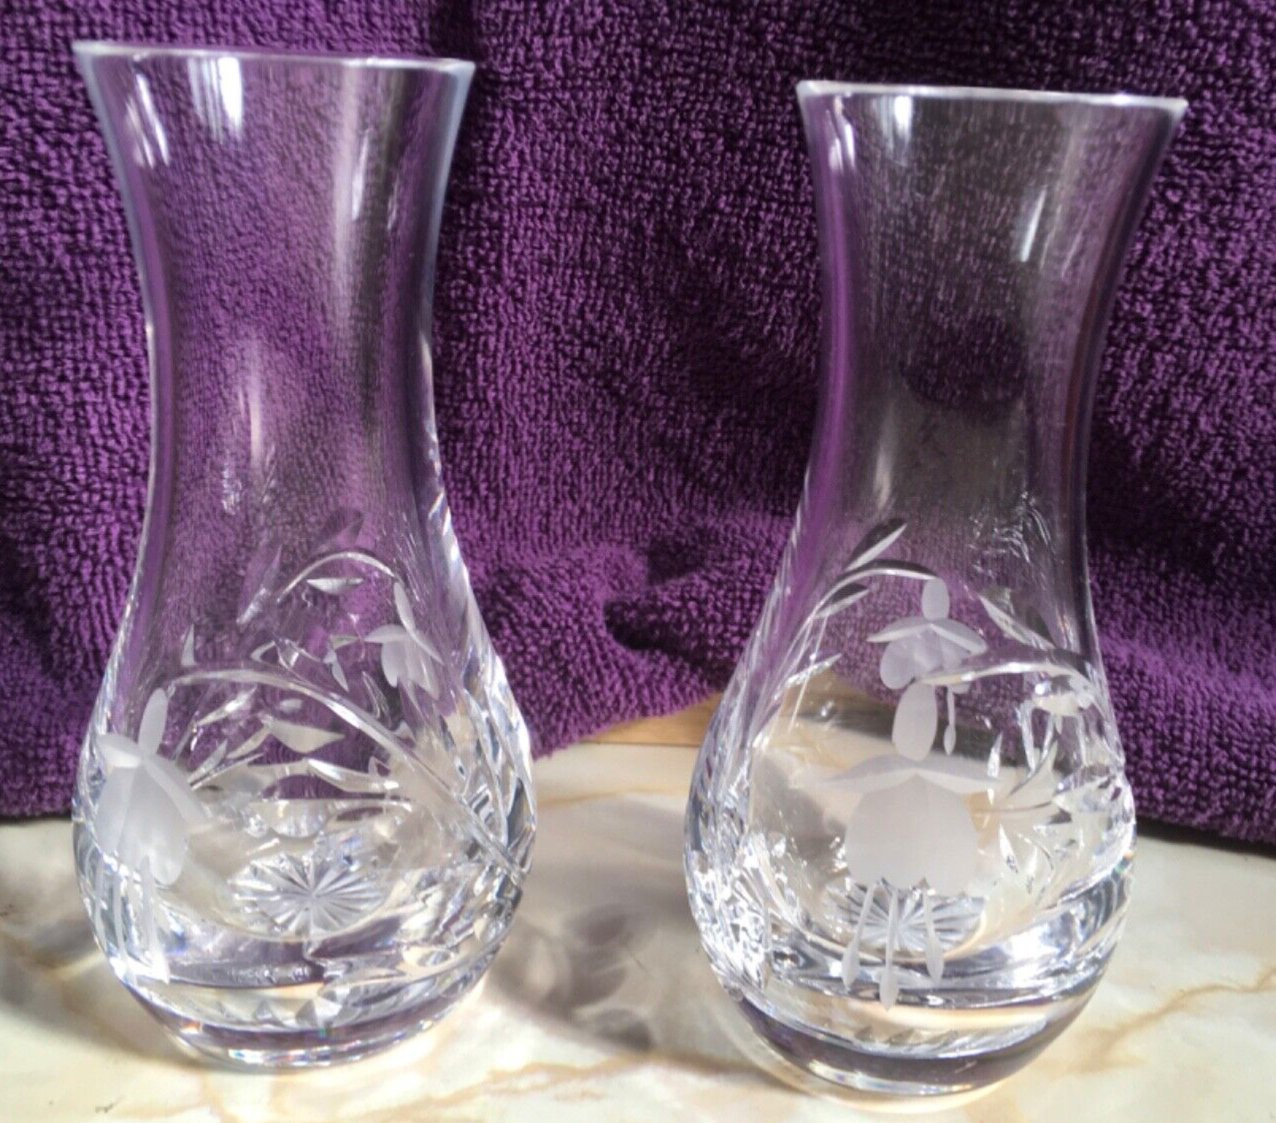 PAIR OF STUART CRYSTAL CUT GLASS VASES 5 INCHES TALL FUCHSIA DESIGN - TMD167207